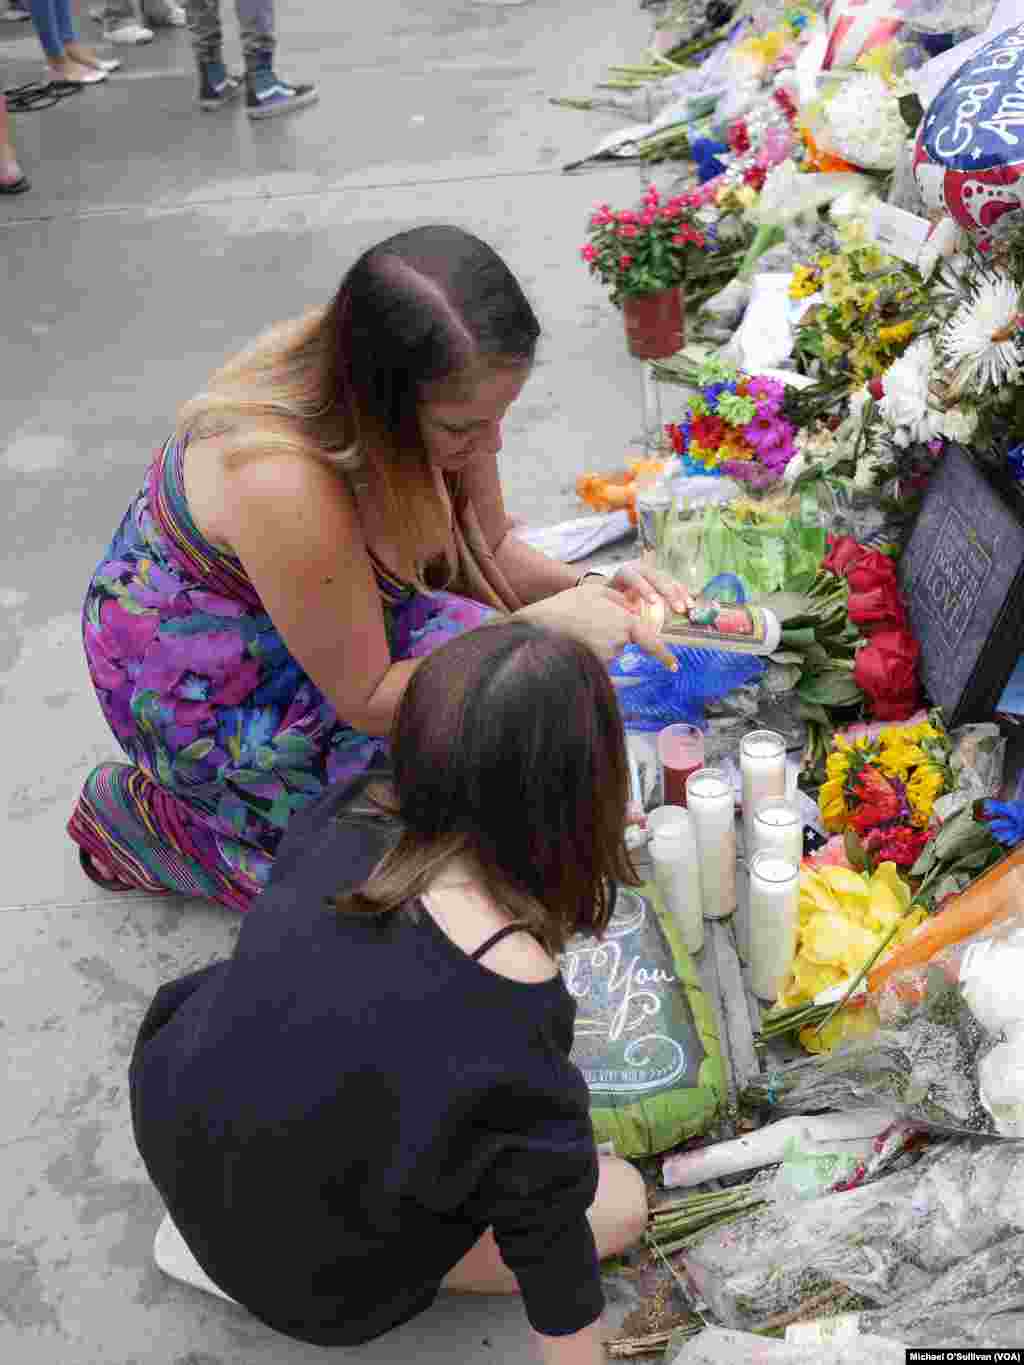 A young woman and girl visit the memorial site in Dallas for the five police officers killed by a sniper Thursday night, July 9, 2016.